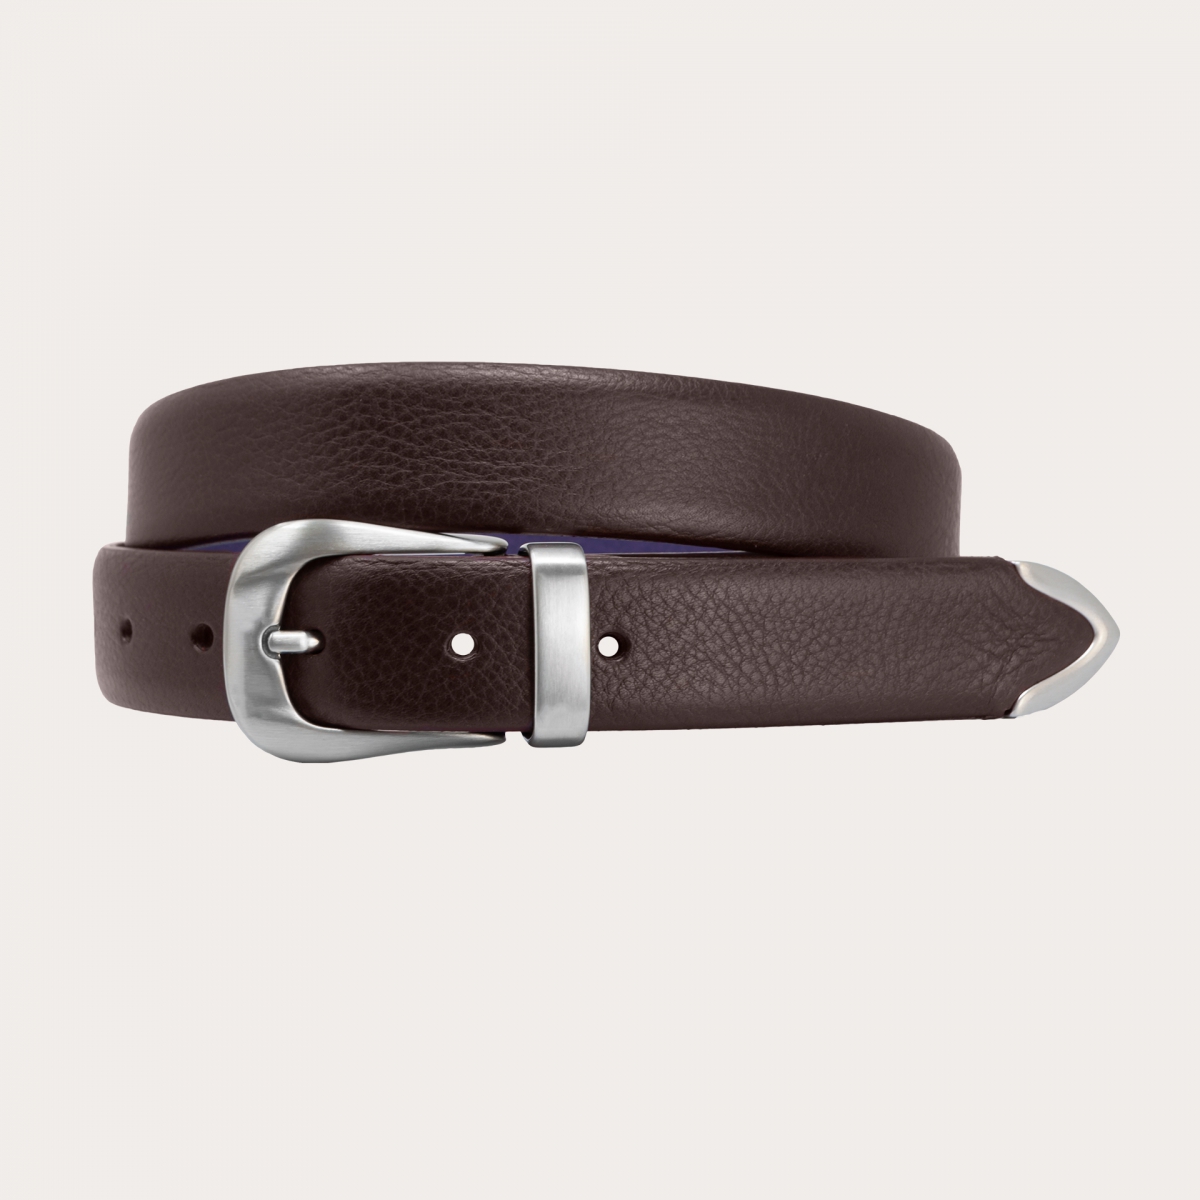 Thin raw cut leather belt with loop, buckle and tip in metal, dark brown